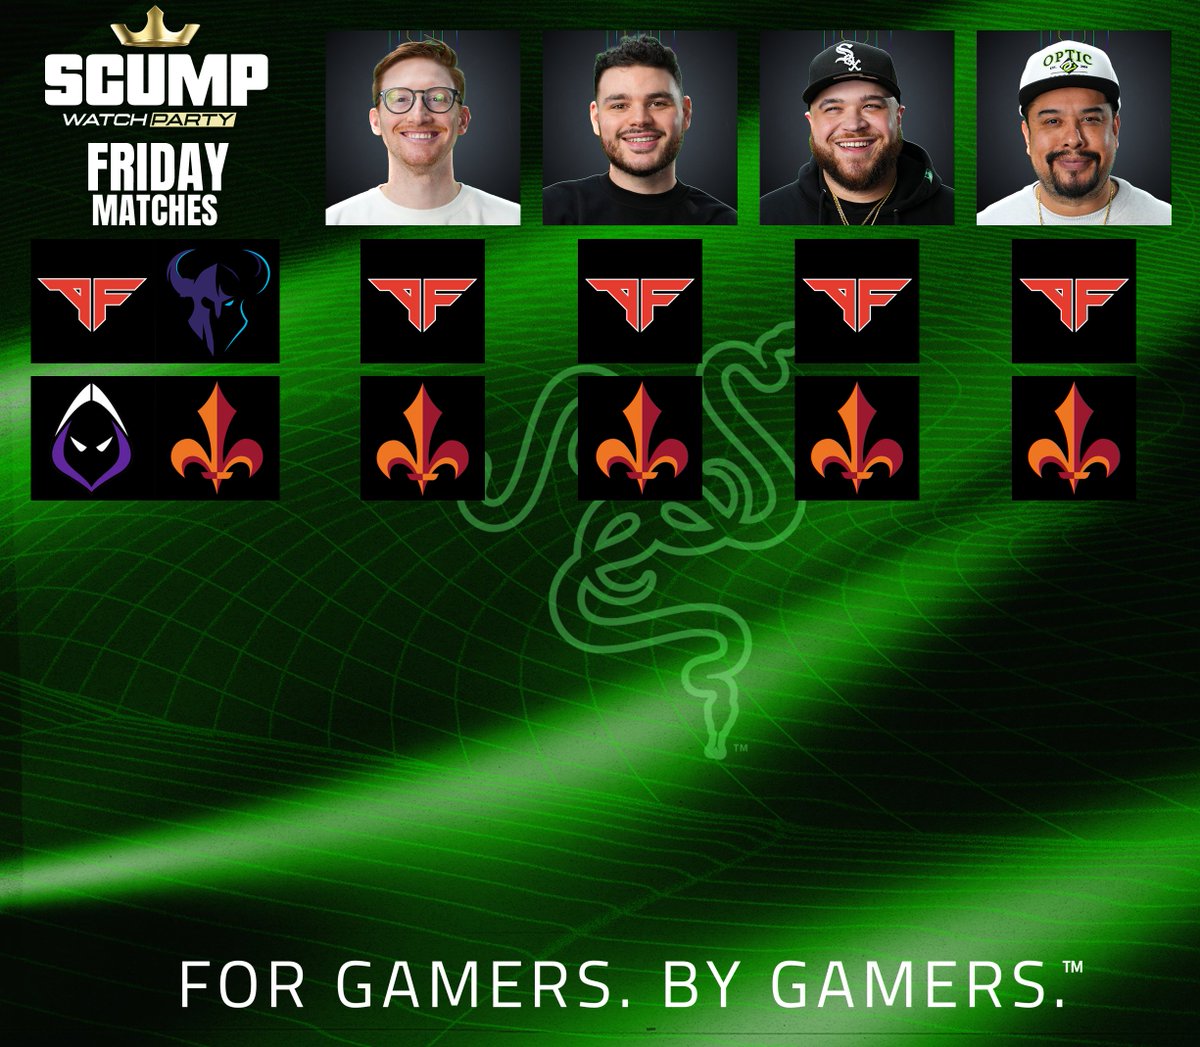 Our CDL predictions today, brought to you by @Razer 🔮